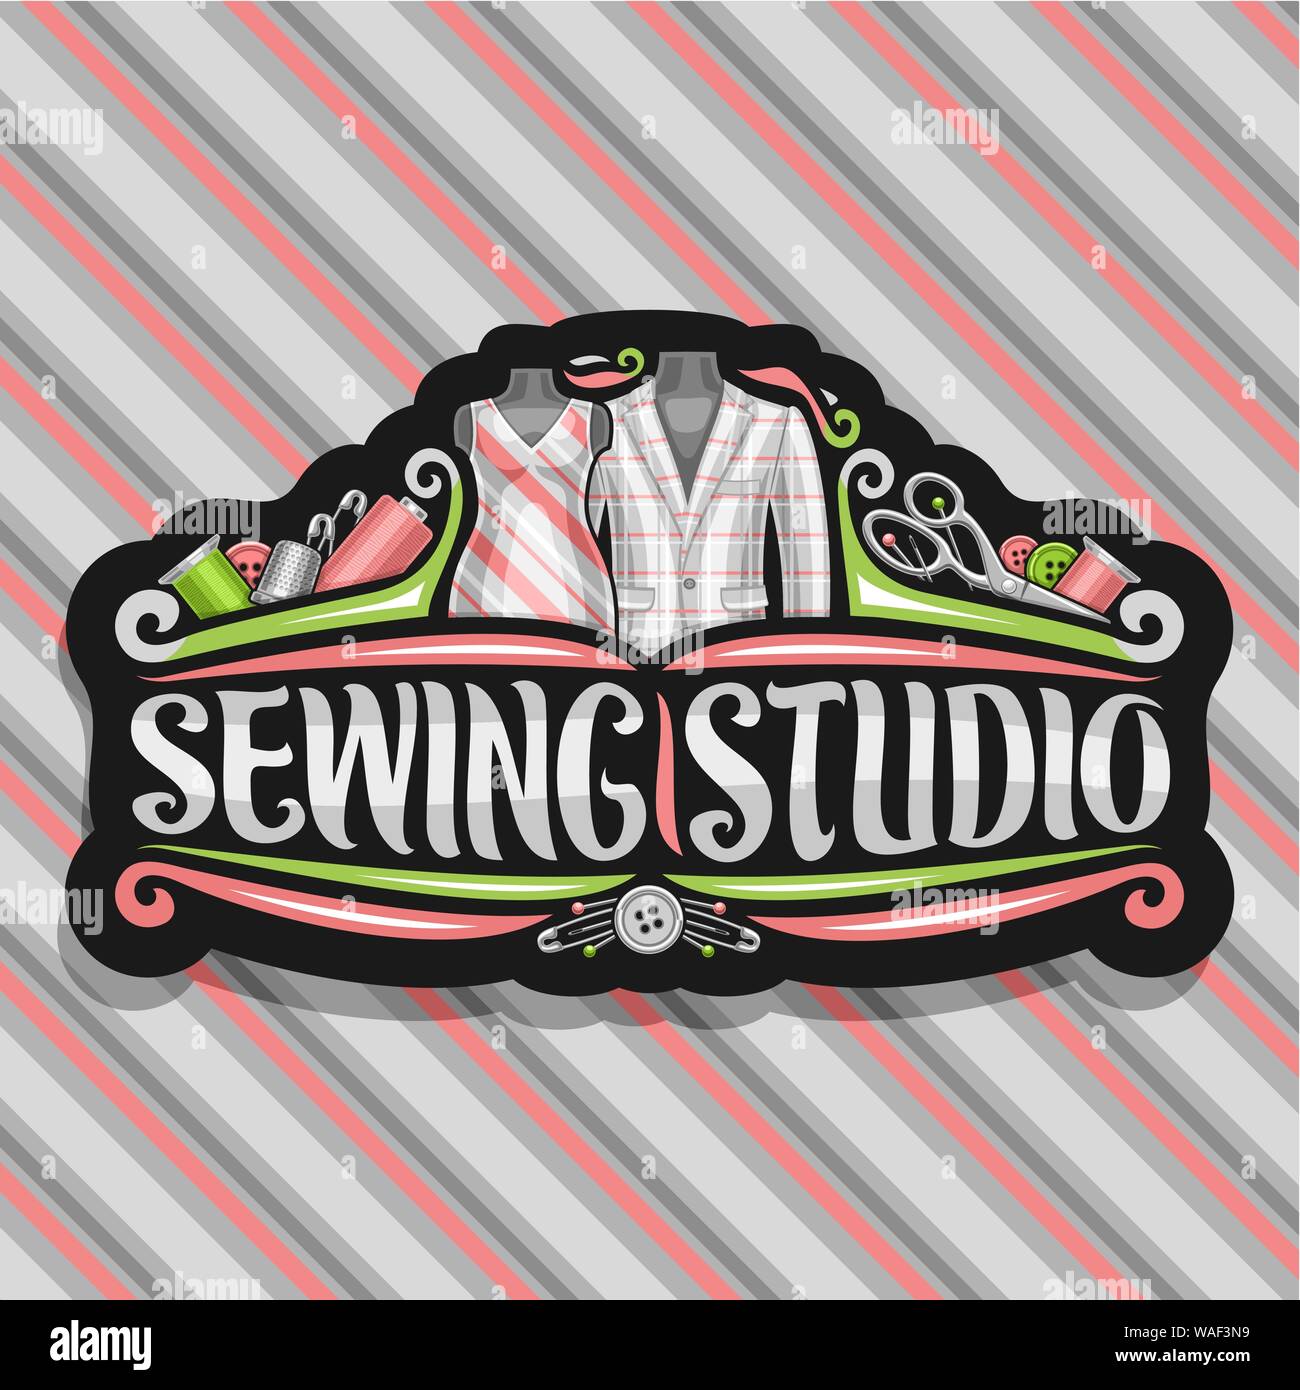 Vector logo for Sewing Studio, black decorative signboard with flourishes, sewing tools, mens blazer and retro female dress on dummies, brush letterin Stock Vector